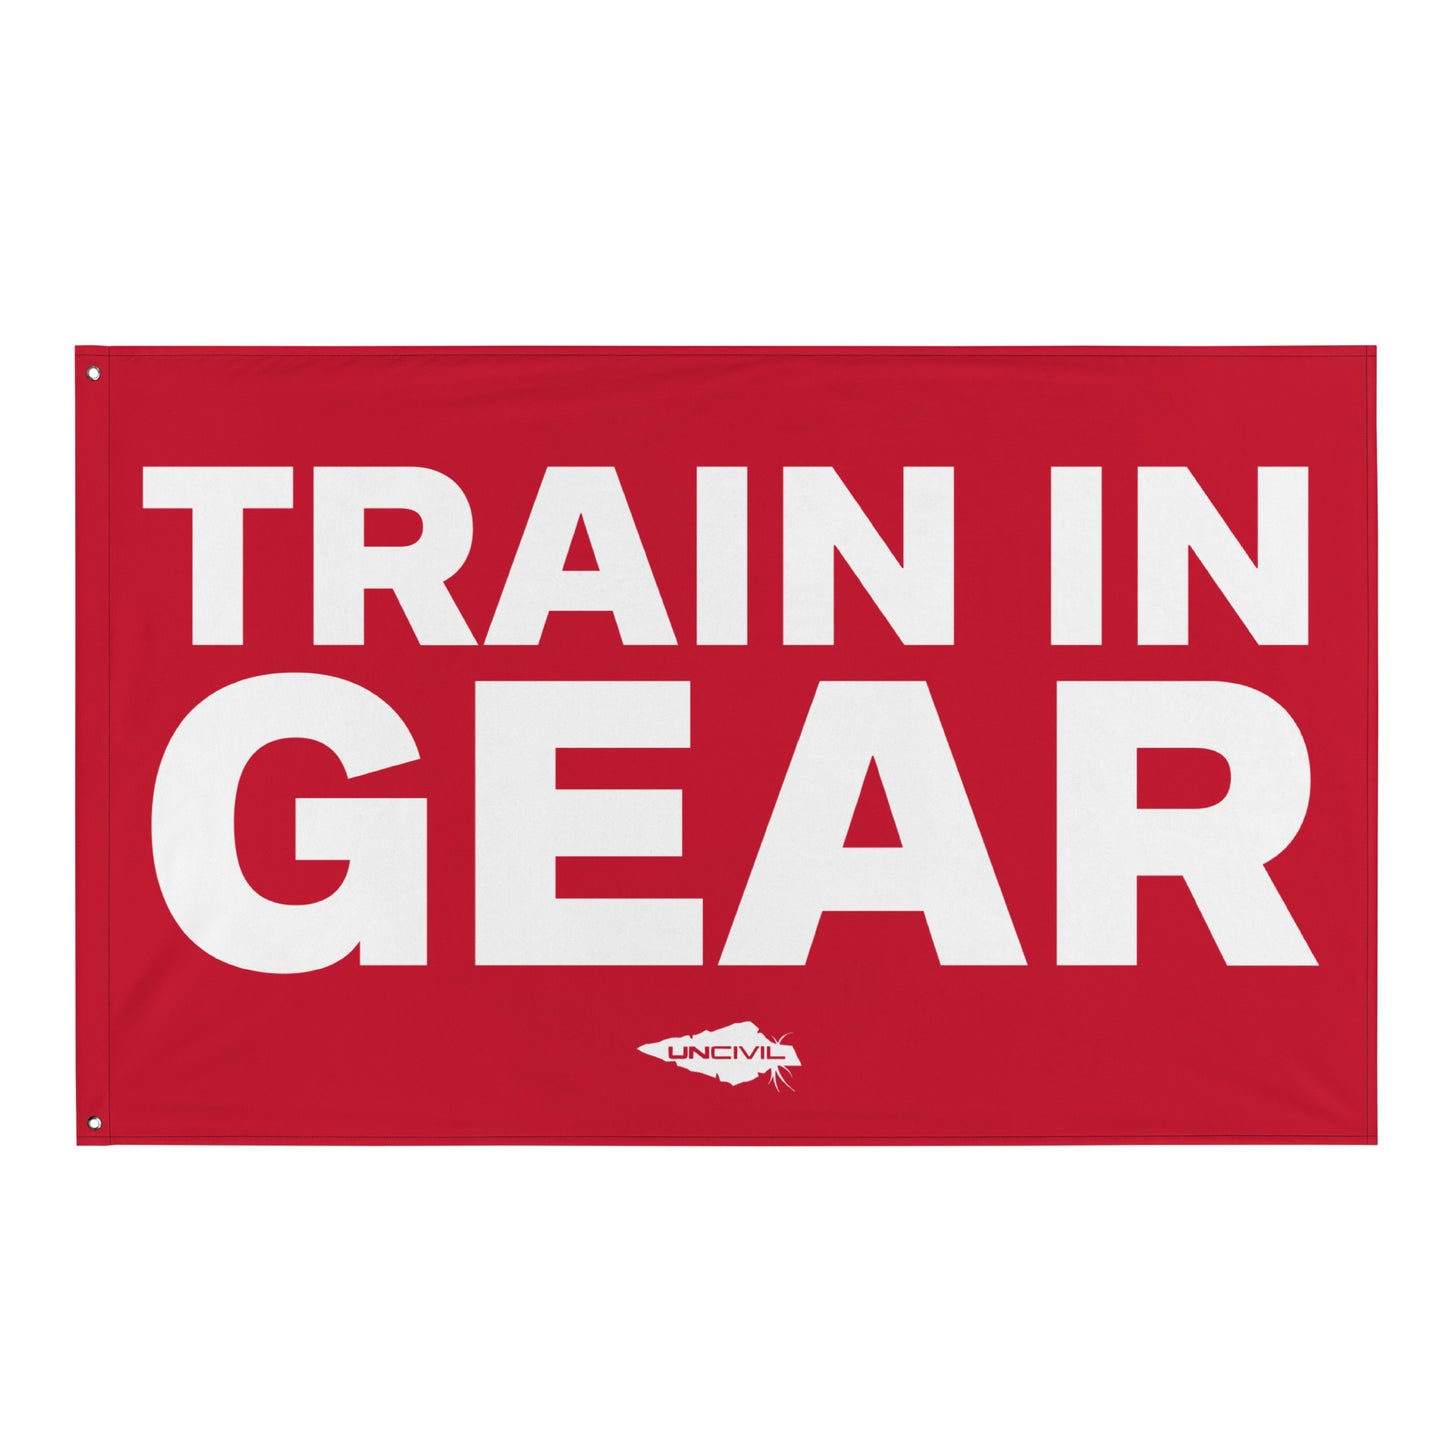 Train in Gear Flag - Red and White